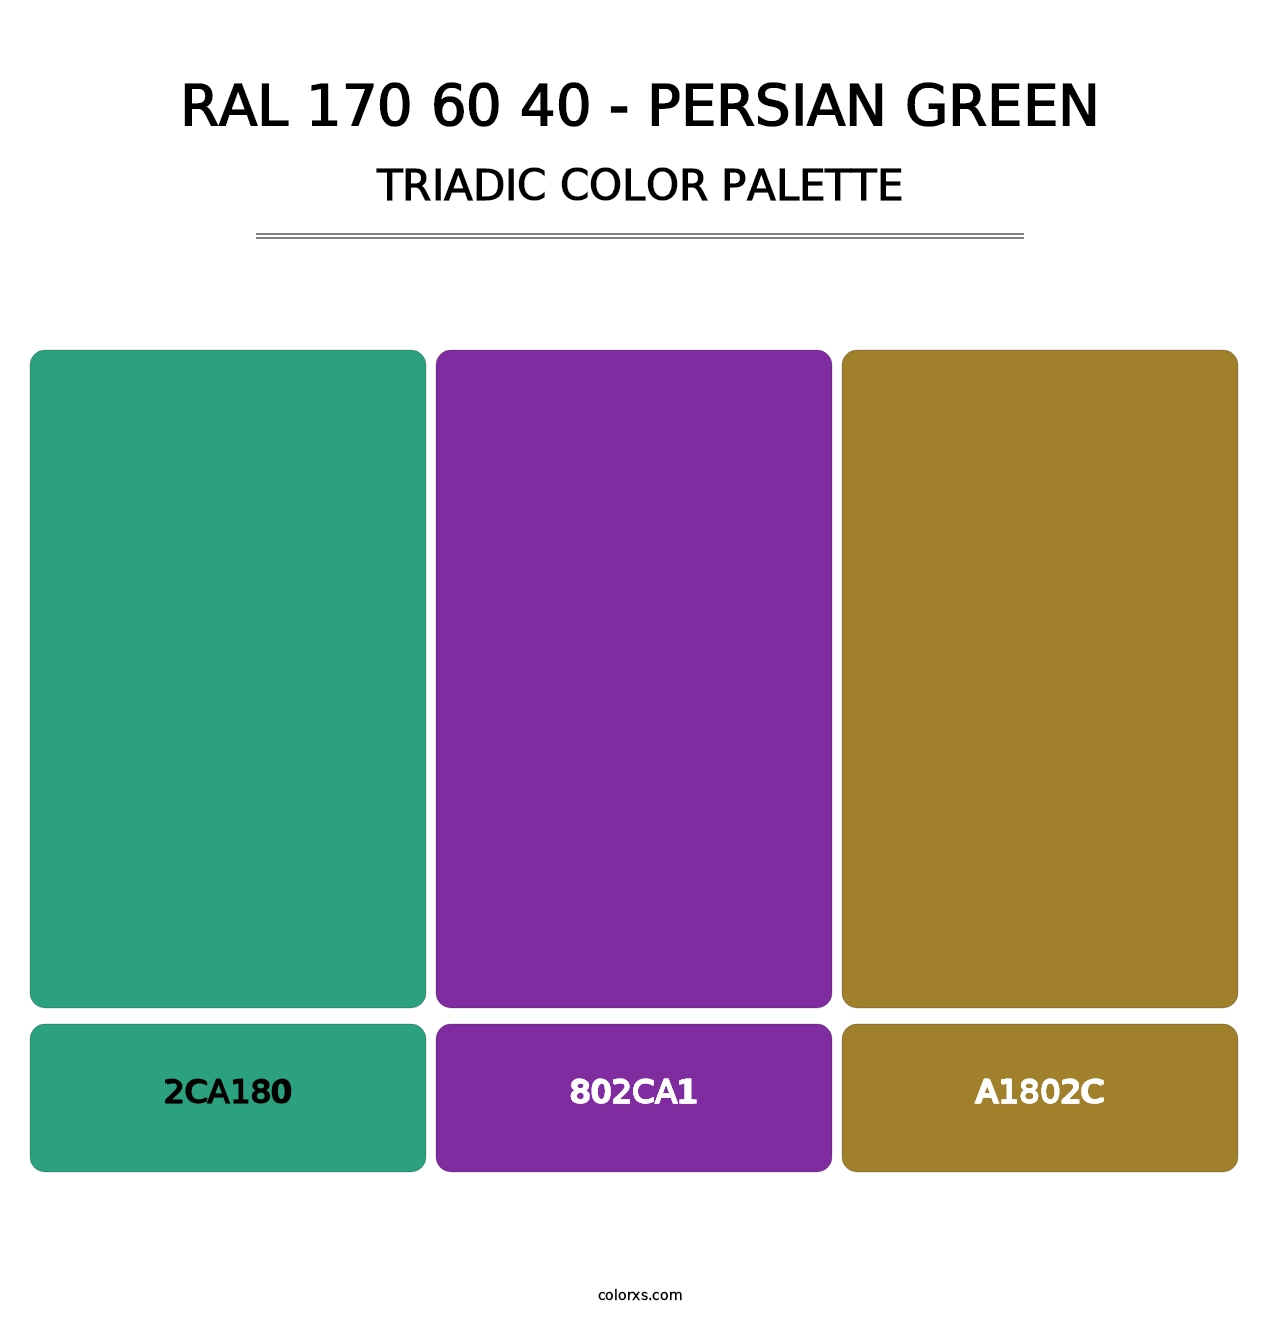 RAL 170 60 40 - Persian Green - Triadic Color Palette